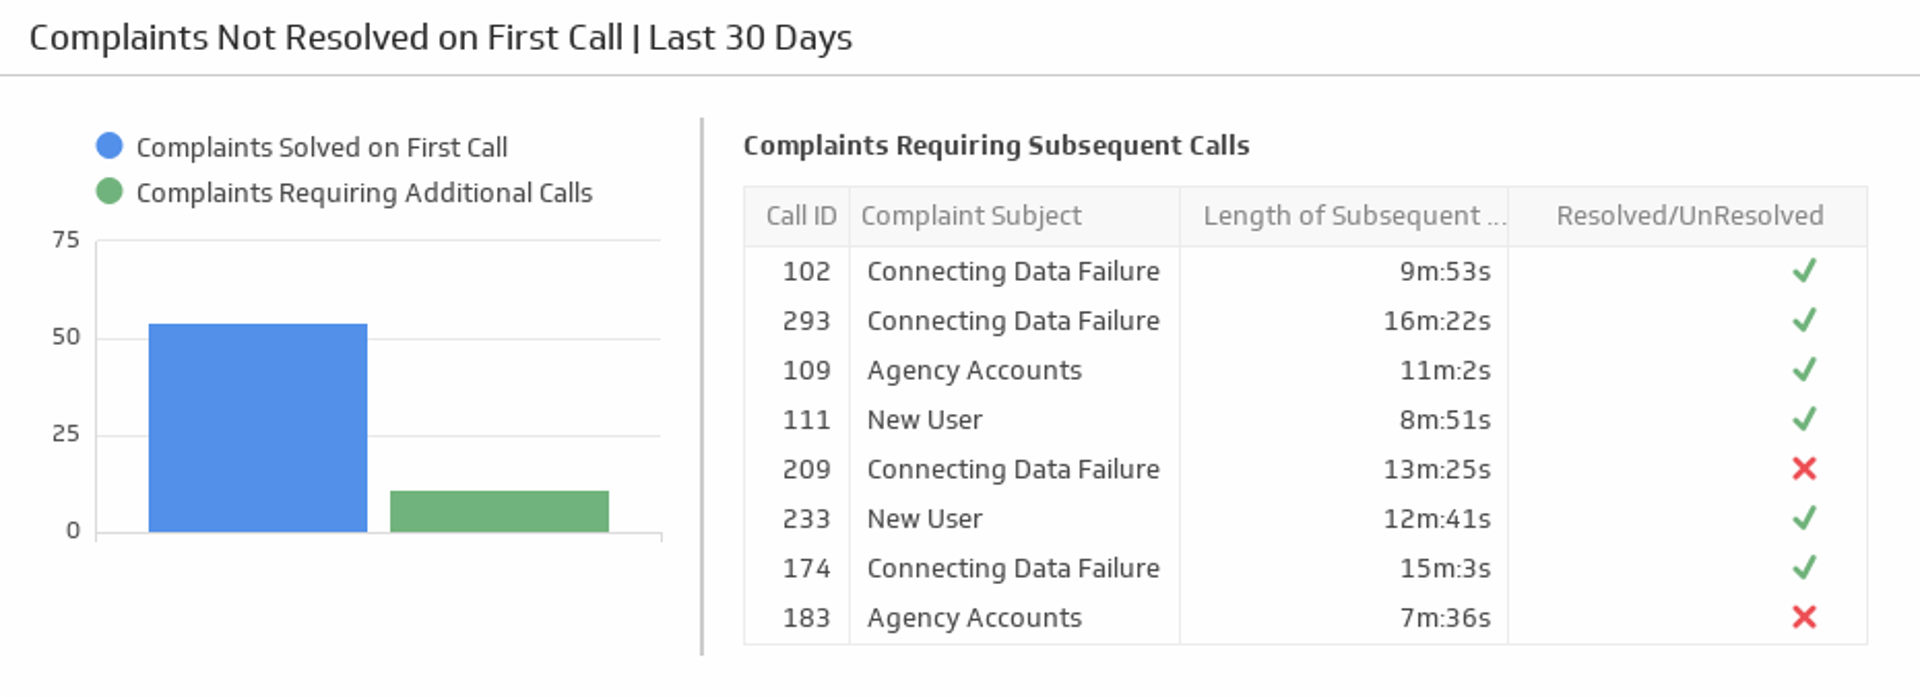 Support KPI Example - Complaints Not Resolved on First Call Metric